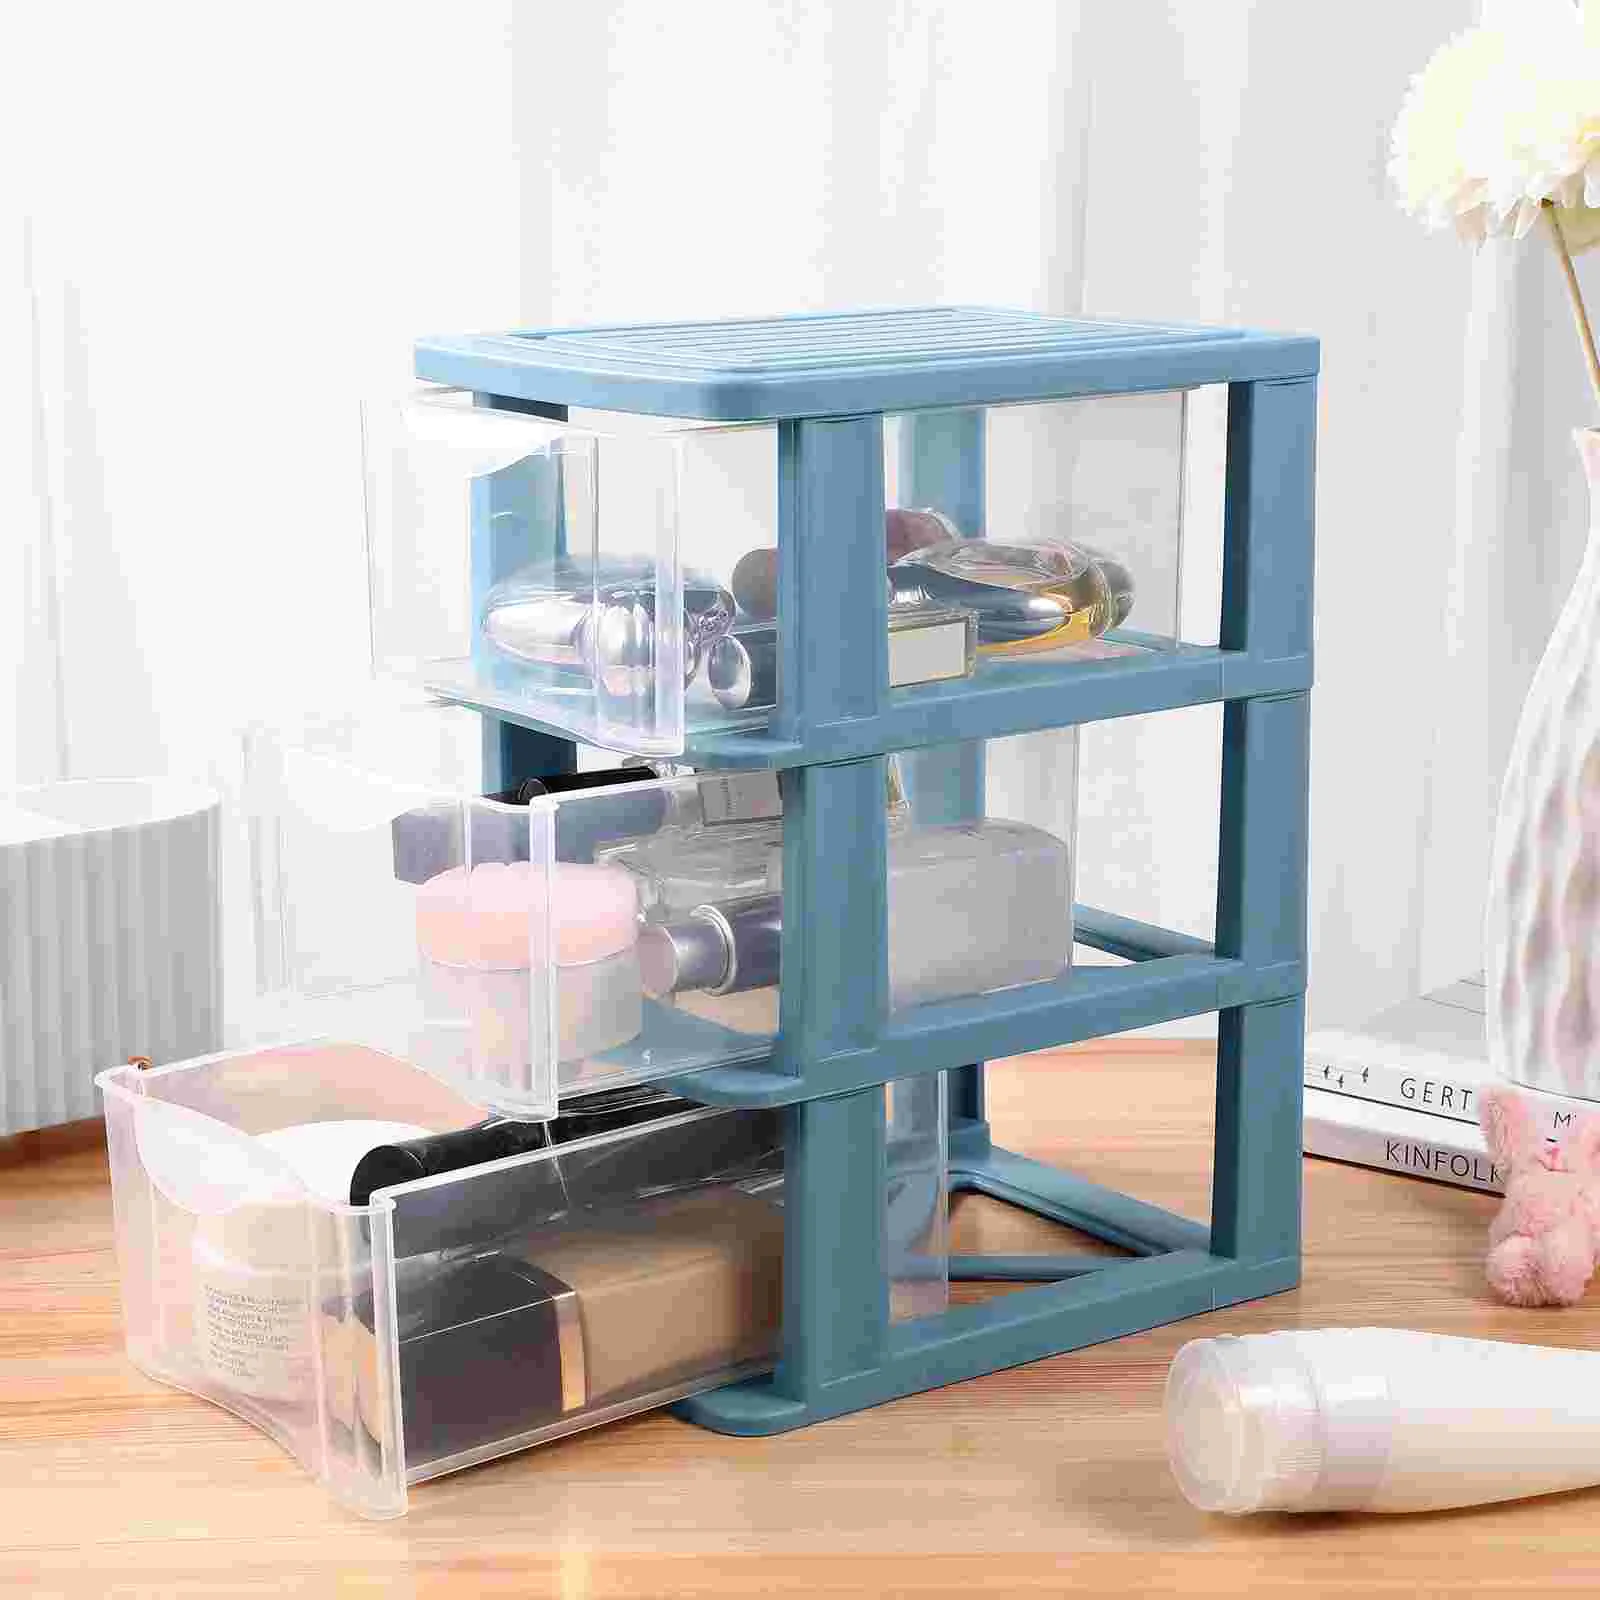 

Shelf Storage Box Plastic Containers Clothes Desk Drawers Organizer Table Pp Desktop Office